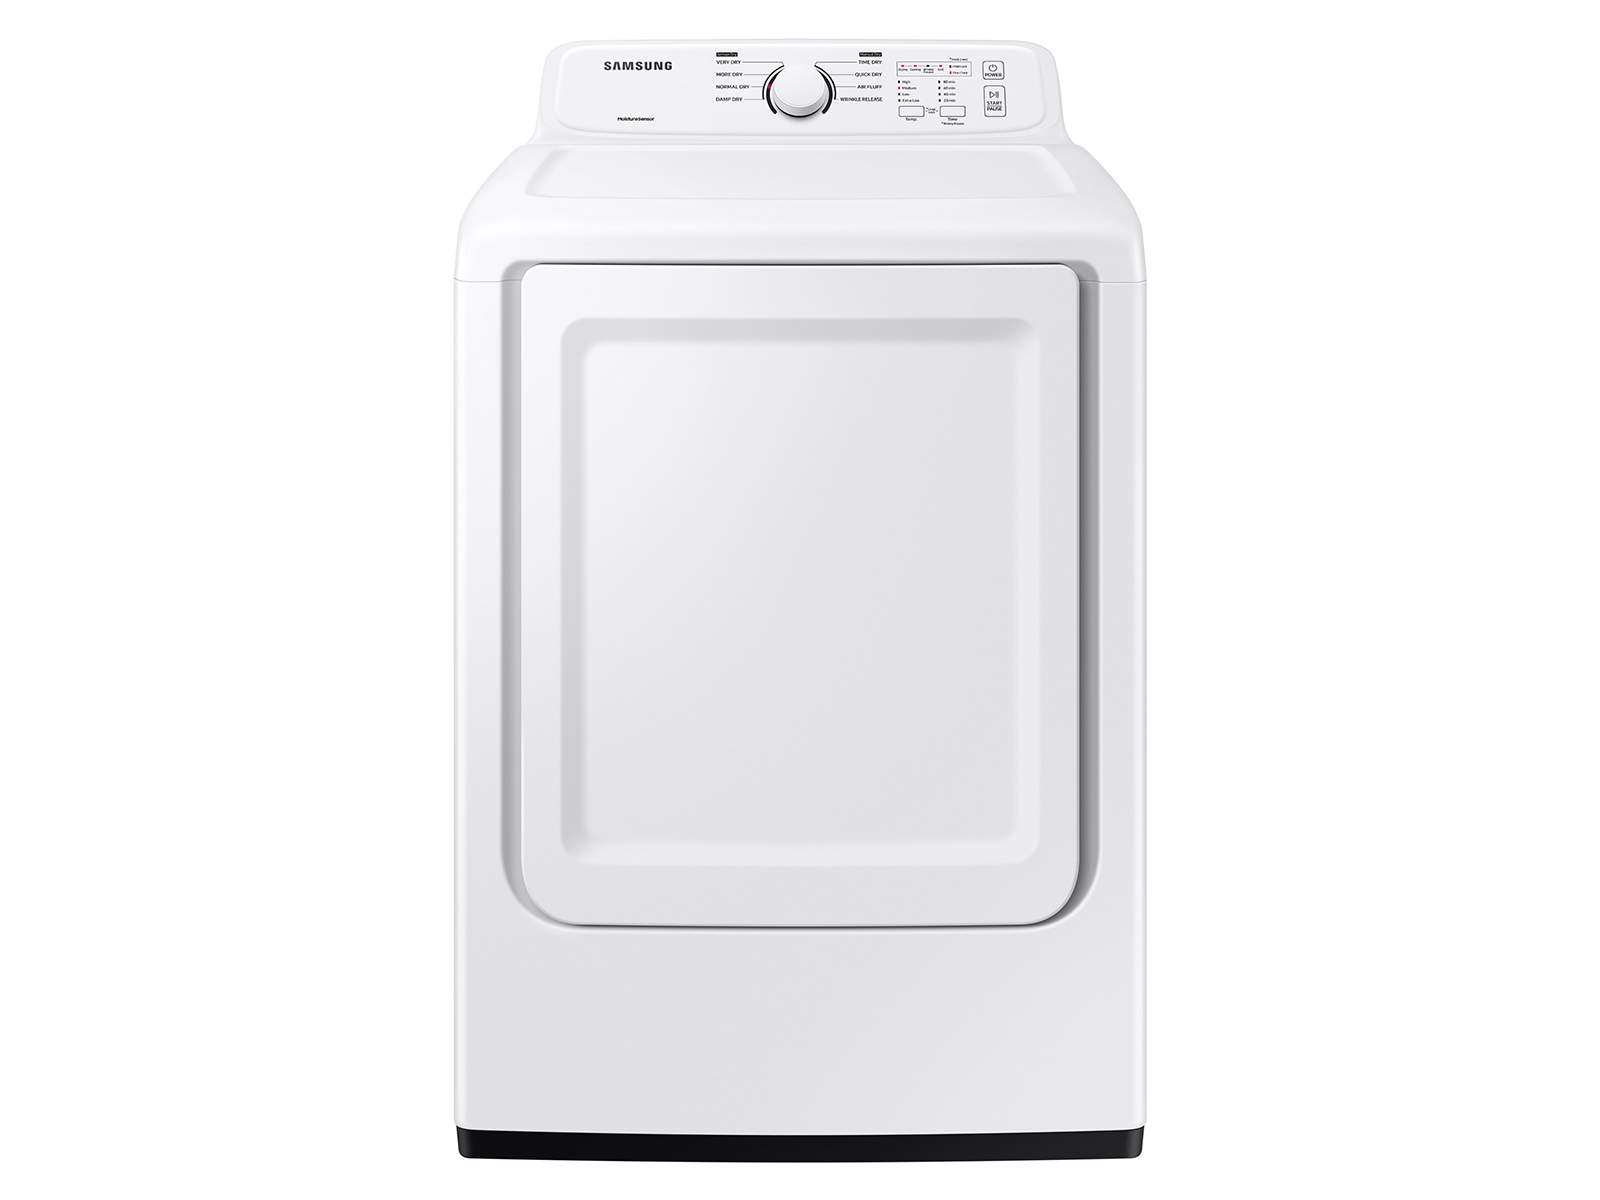 Photos - Tumble Dryer Samsung 7.2 cu. ft. Gas Dryer with Sensor Dry and 8 Drying Cycles in White 